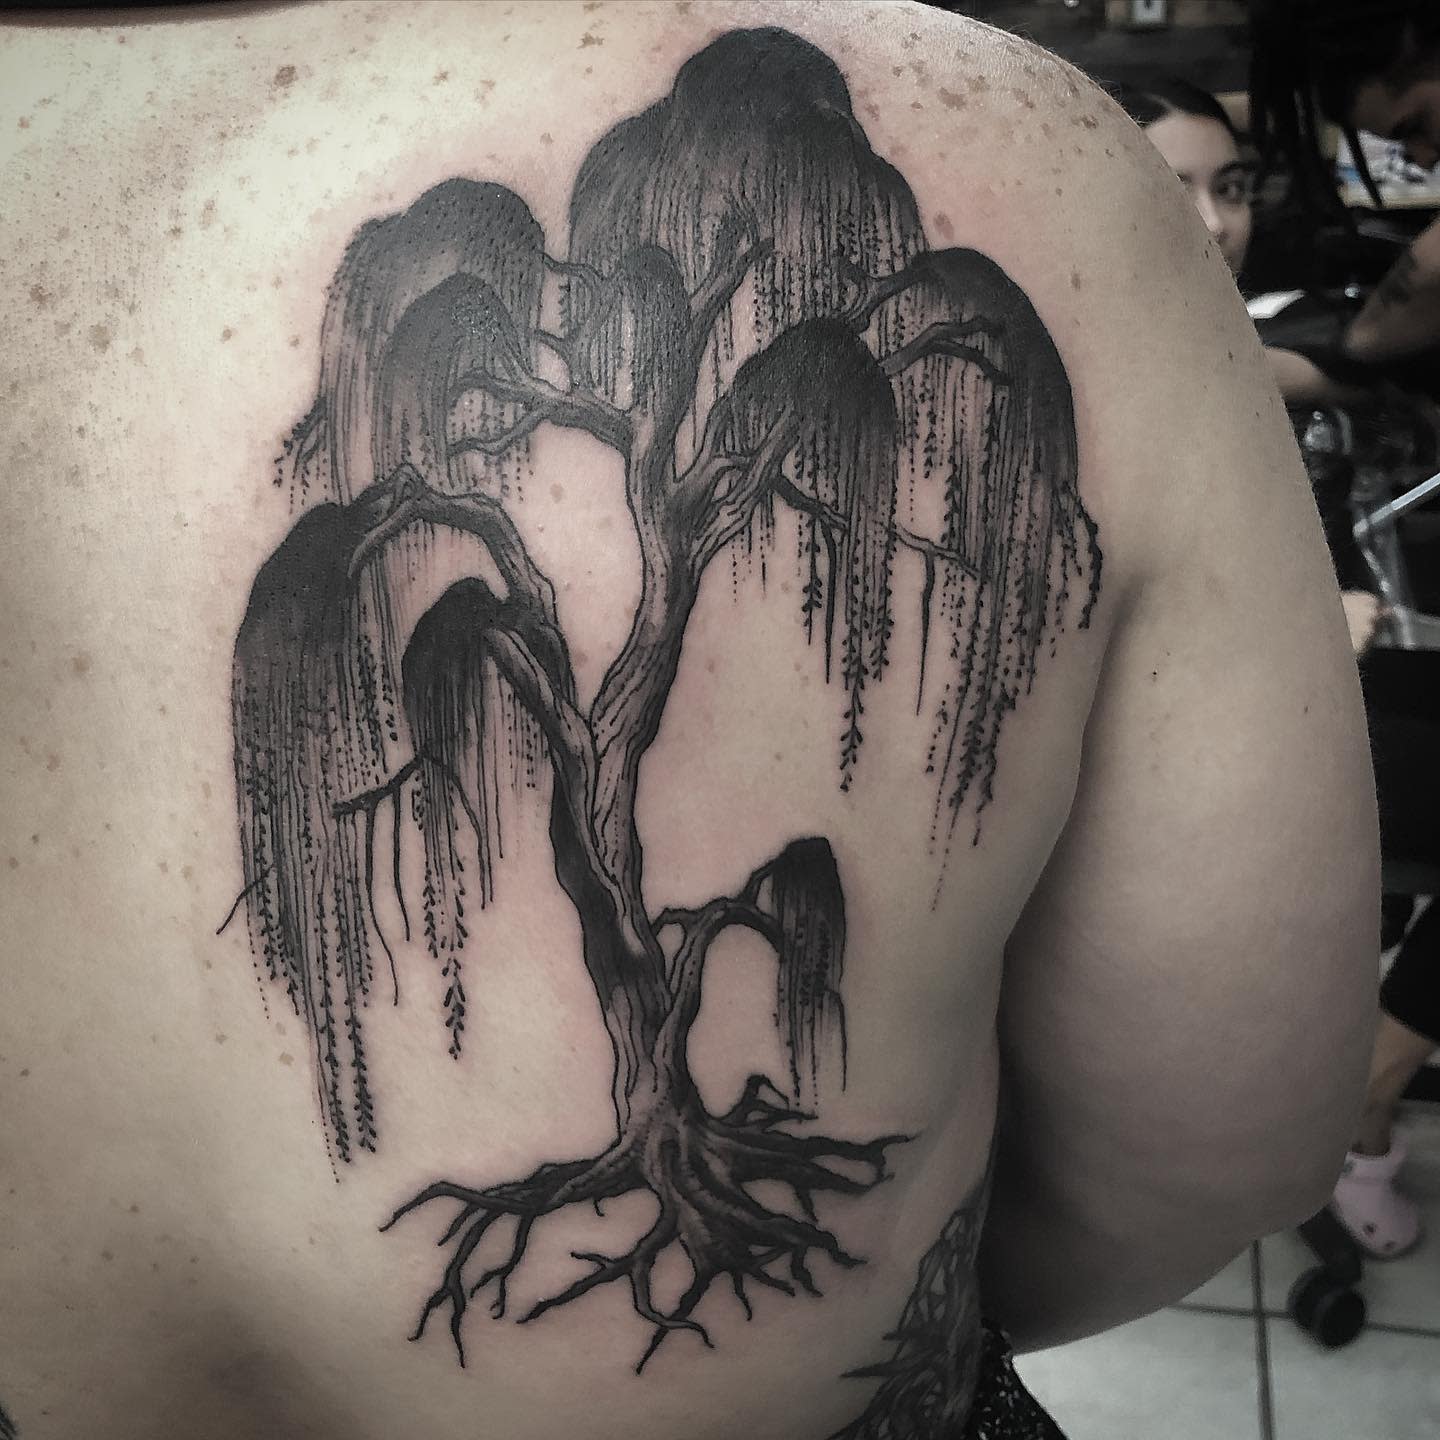 Traditional or Neotrad Weeping Willow Tattoo -niknatas